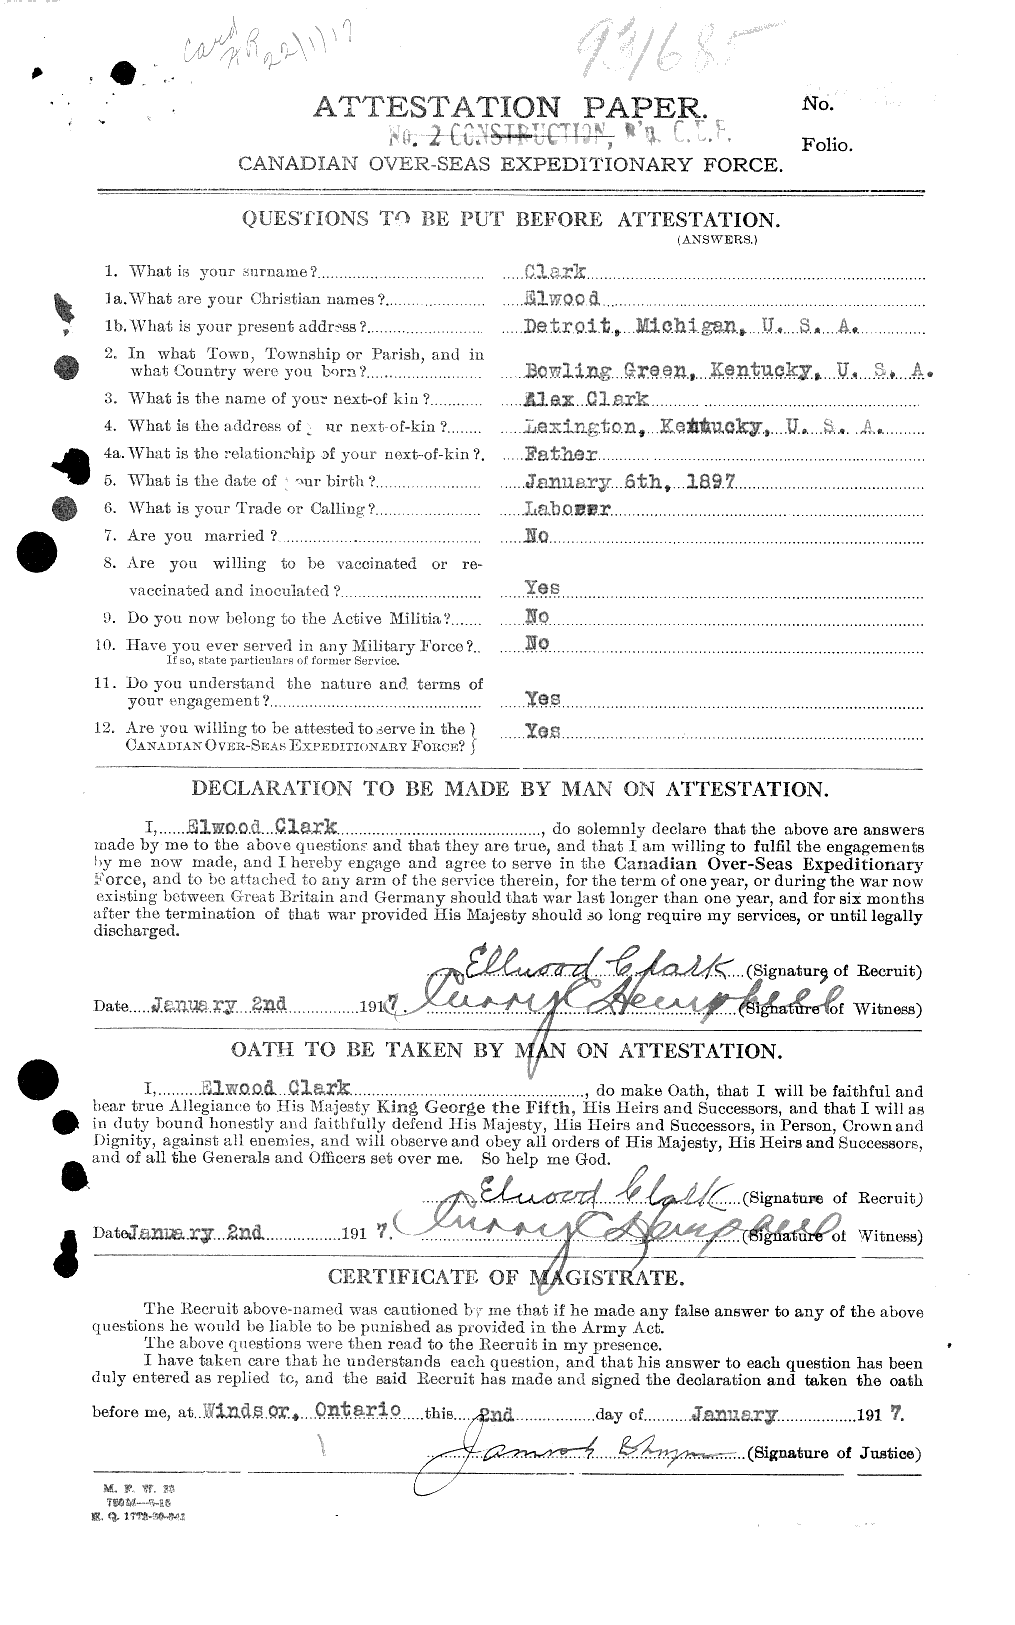 Personnel Records of the First World War - CEF 024212a